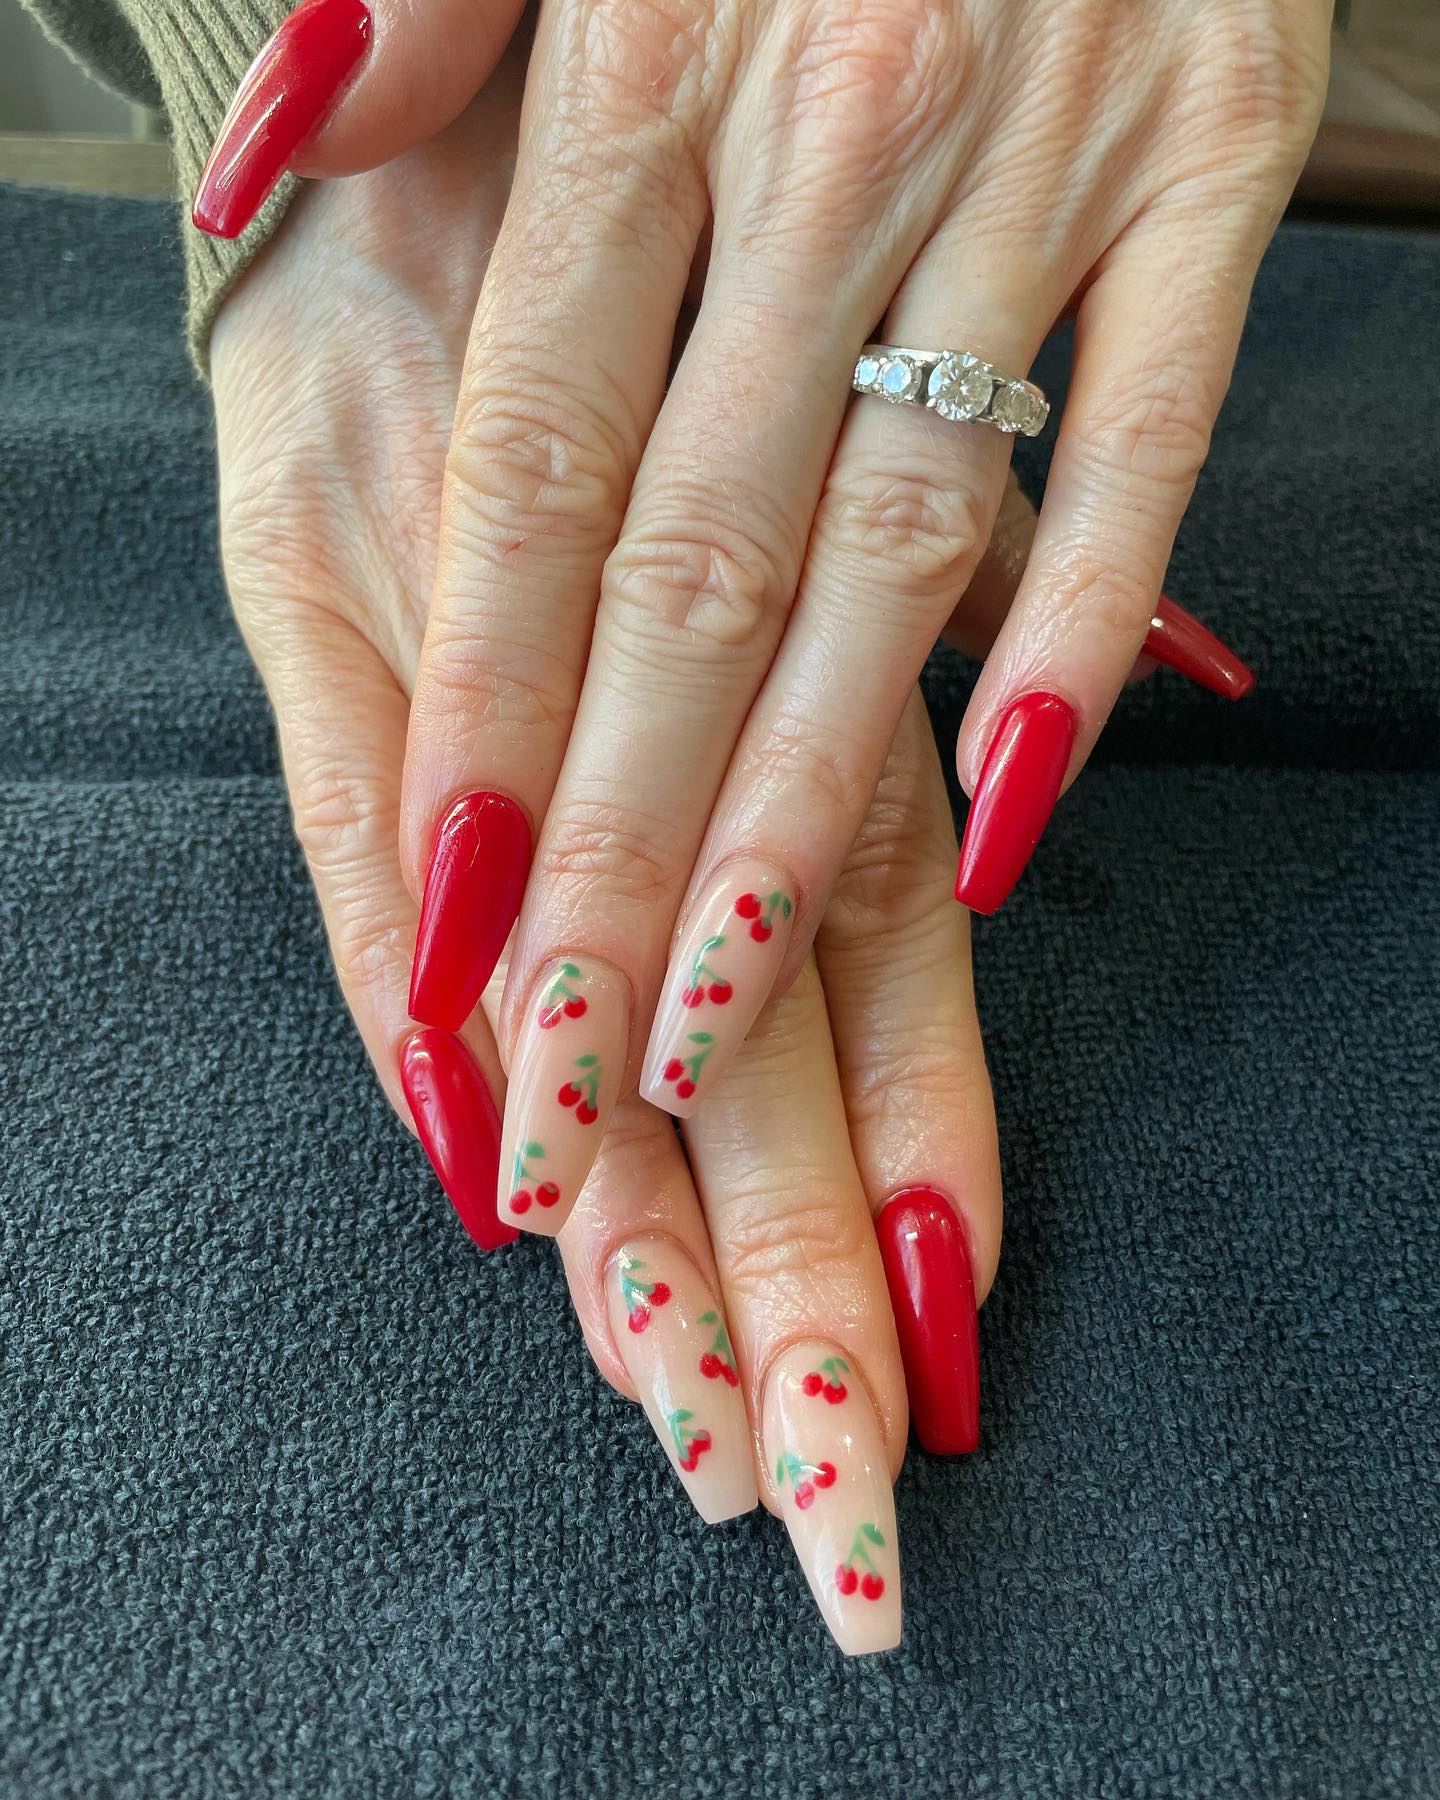 We can see cherries all around especially in summer. As accent nails, they are a cute choice to combine with red nails.